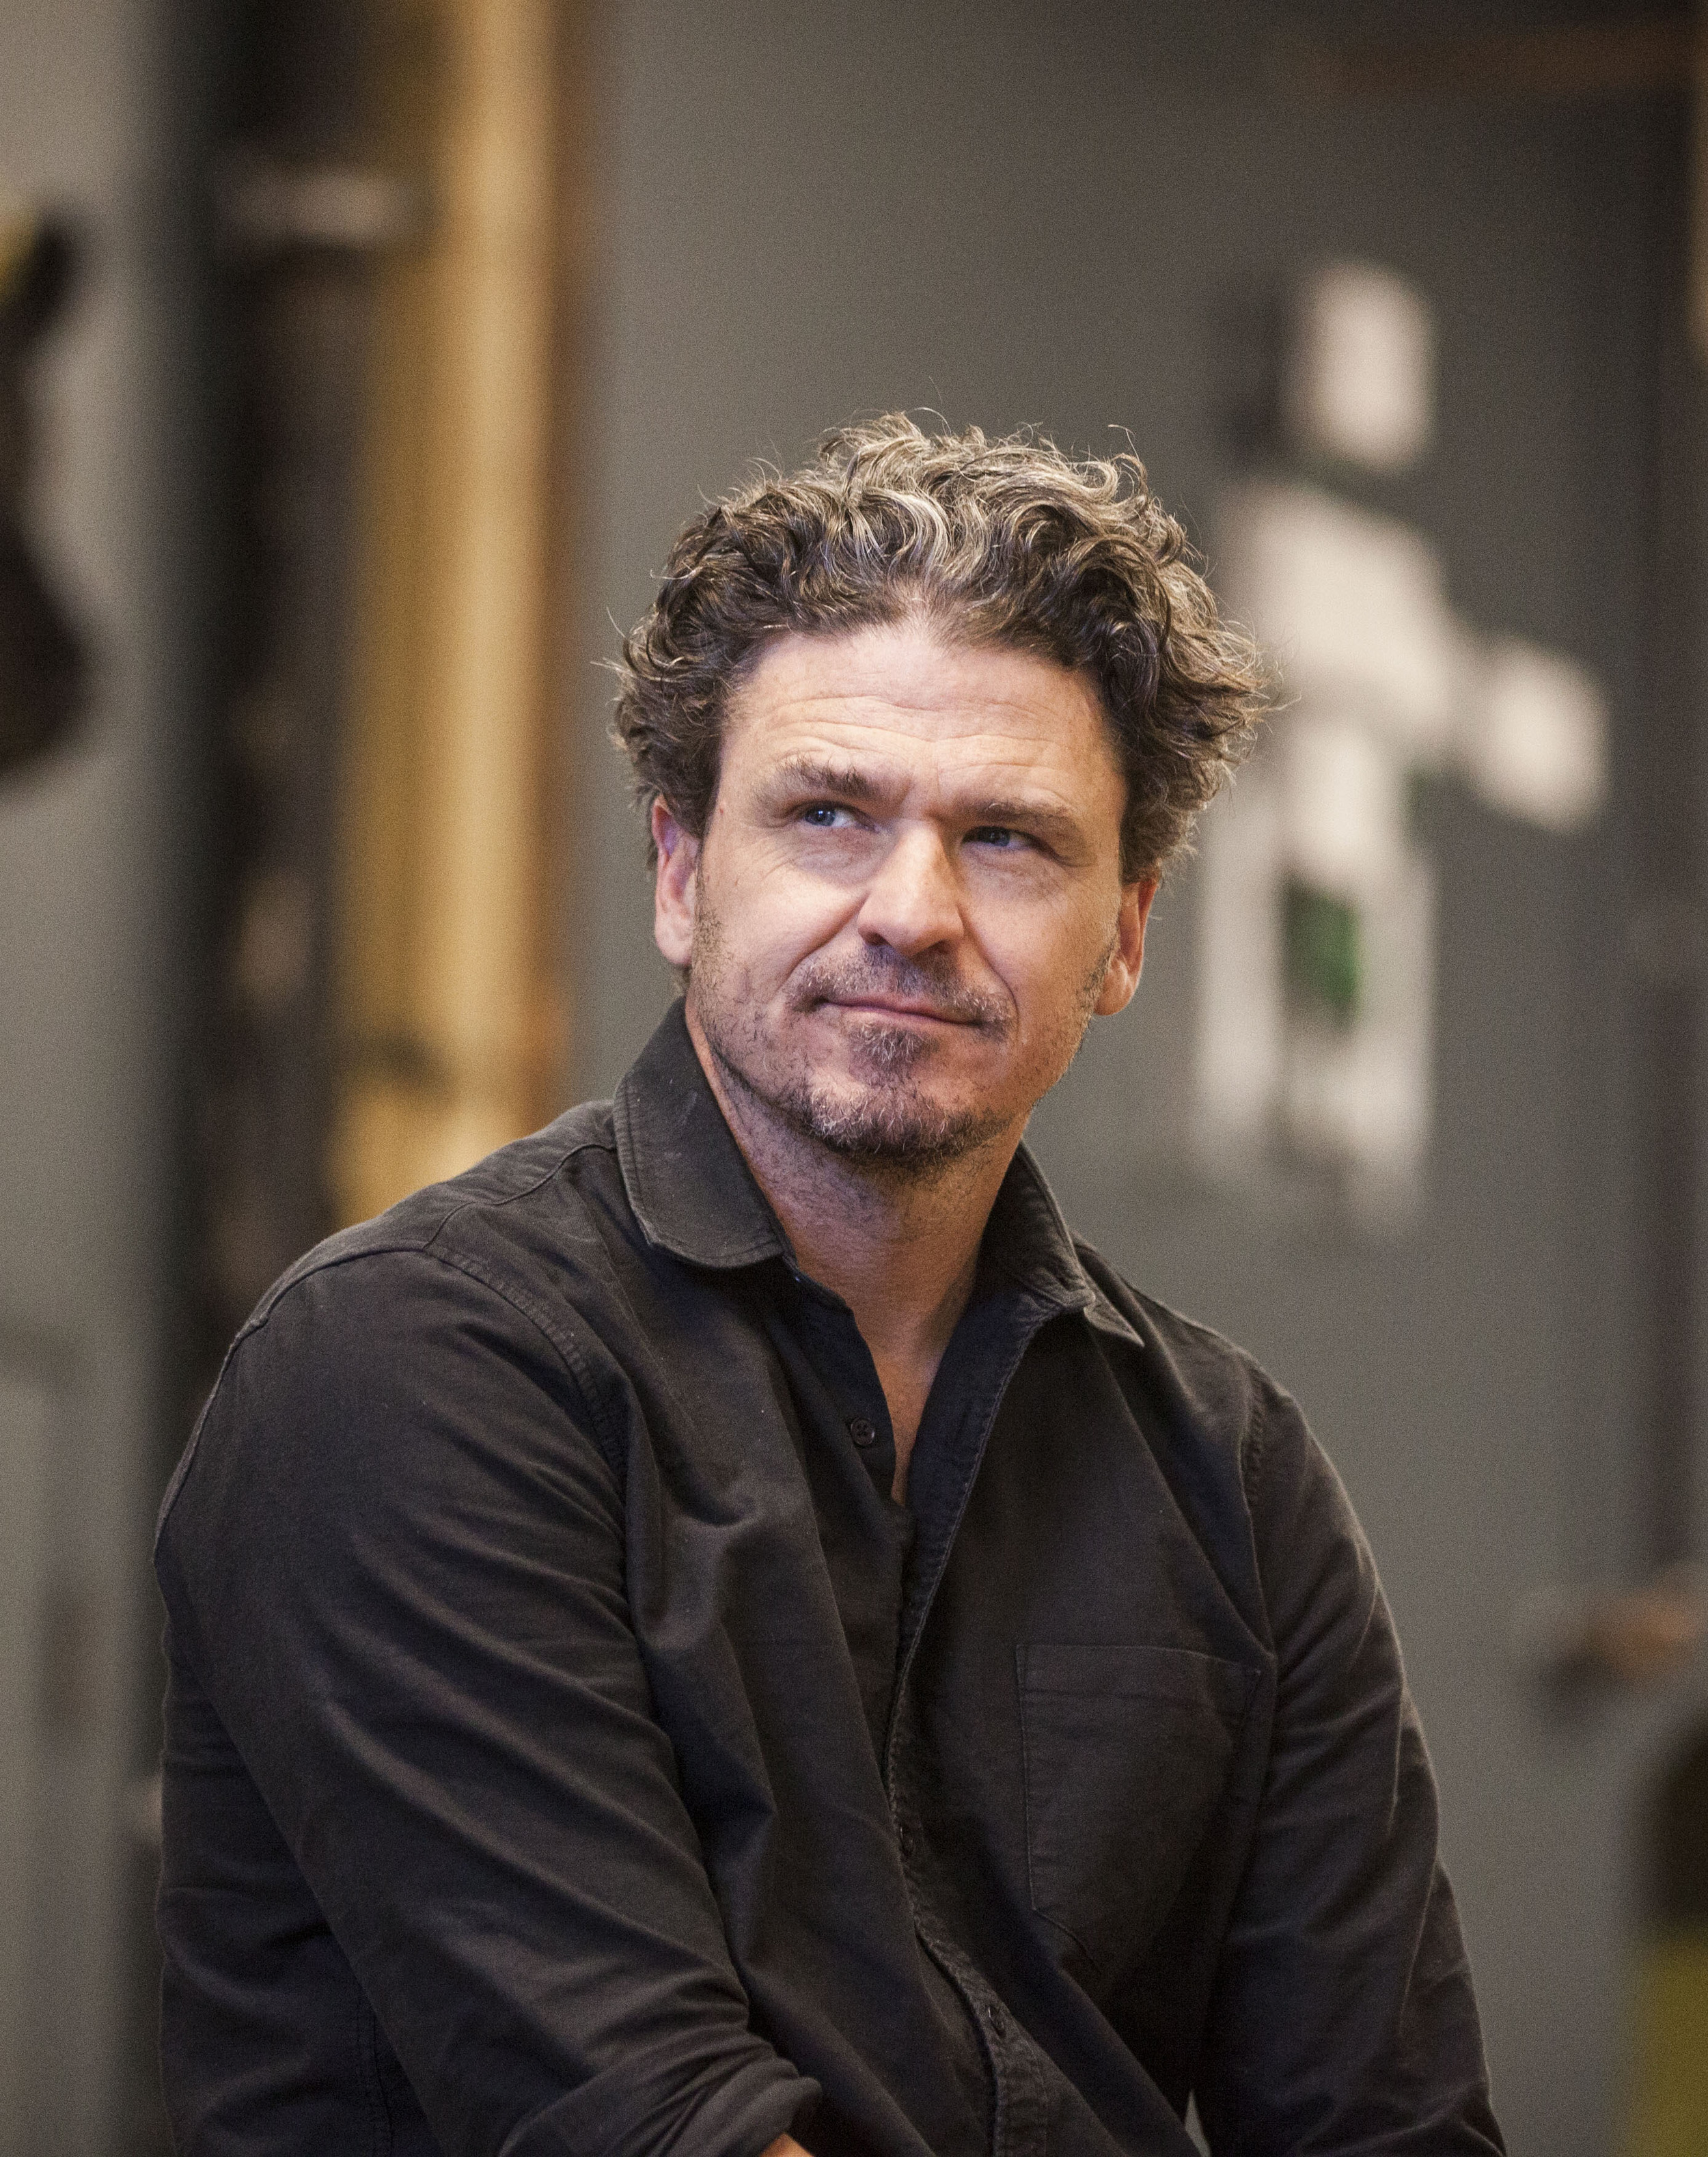 Author Dave Eggers for The Globe & Mail